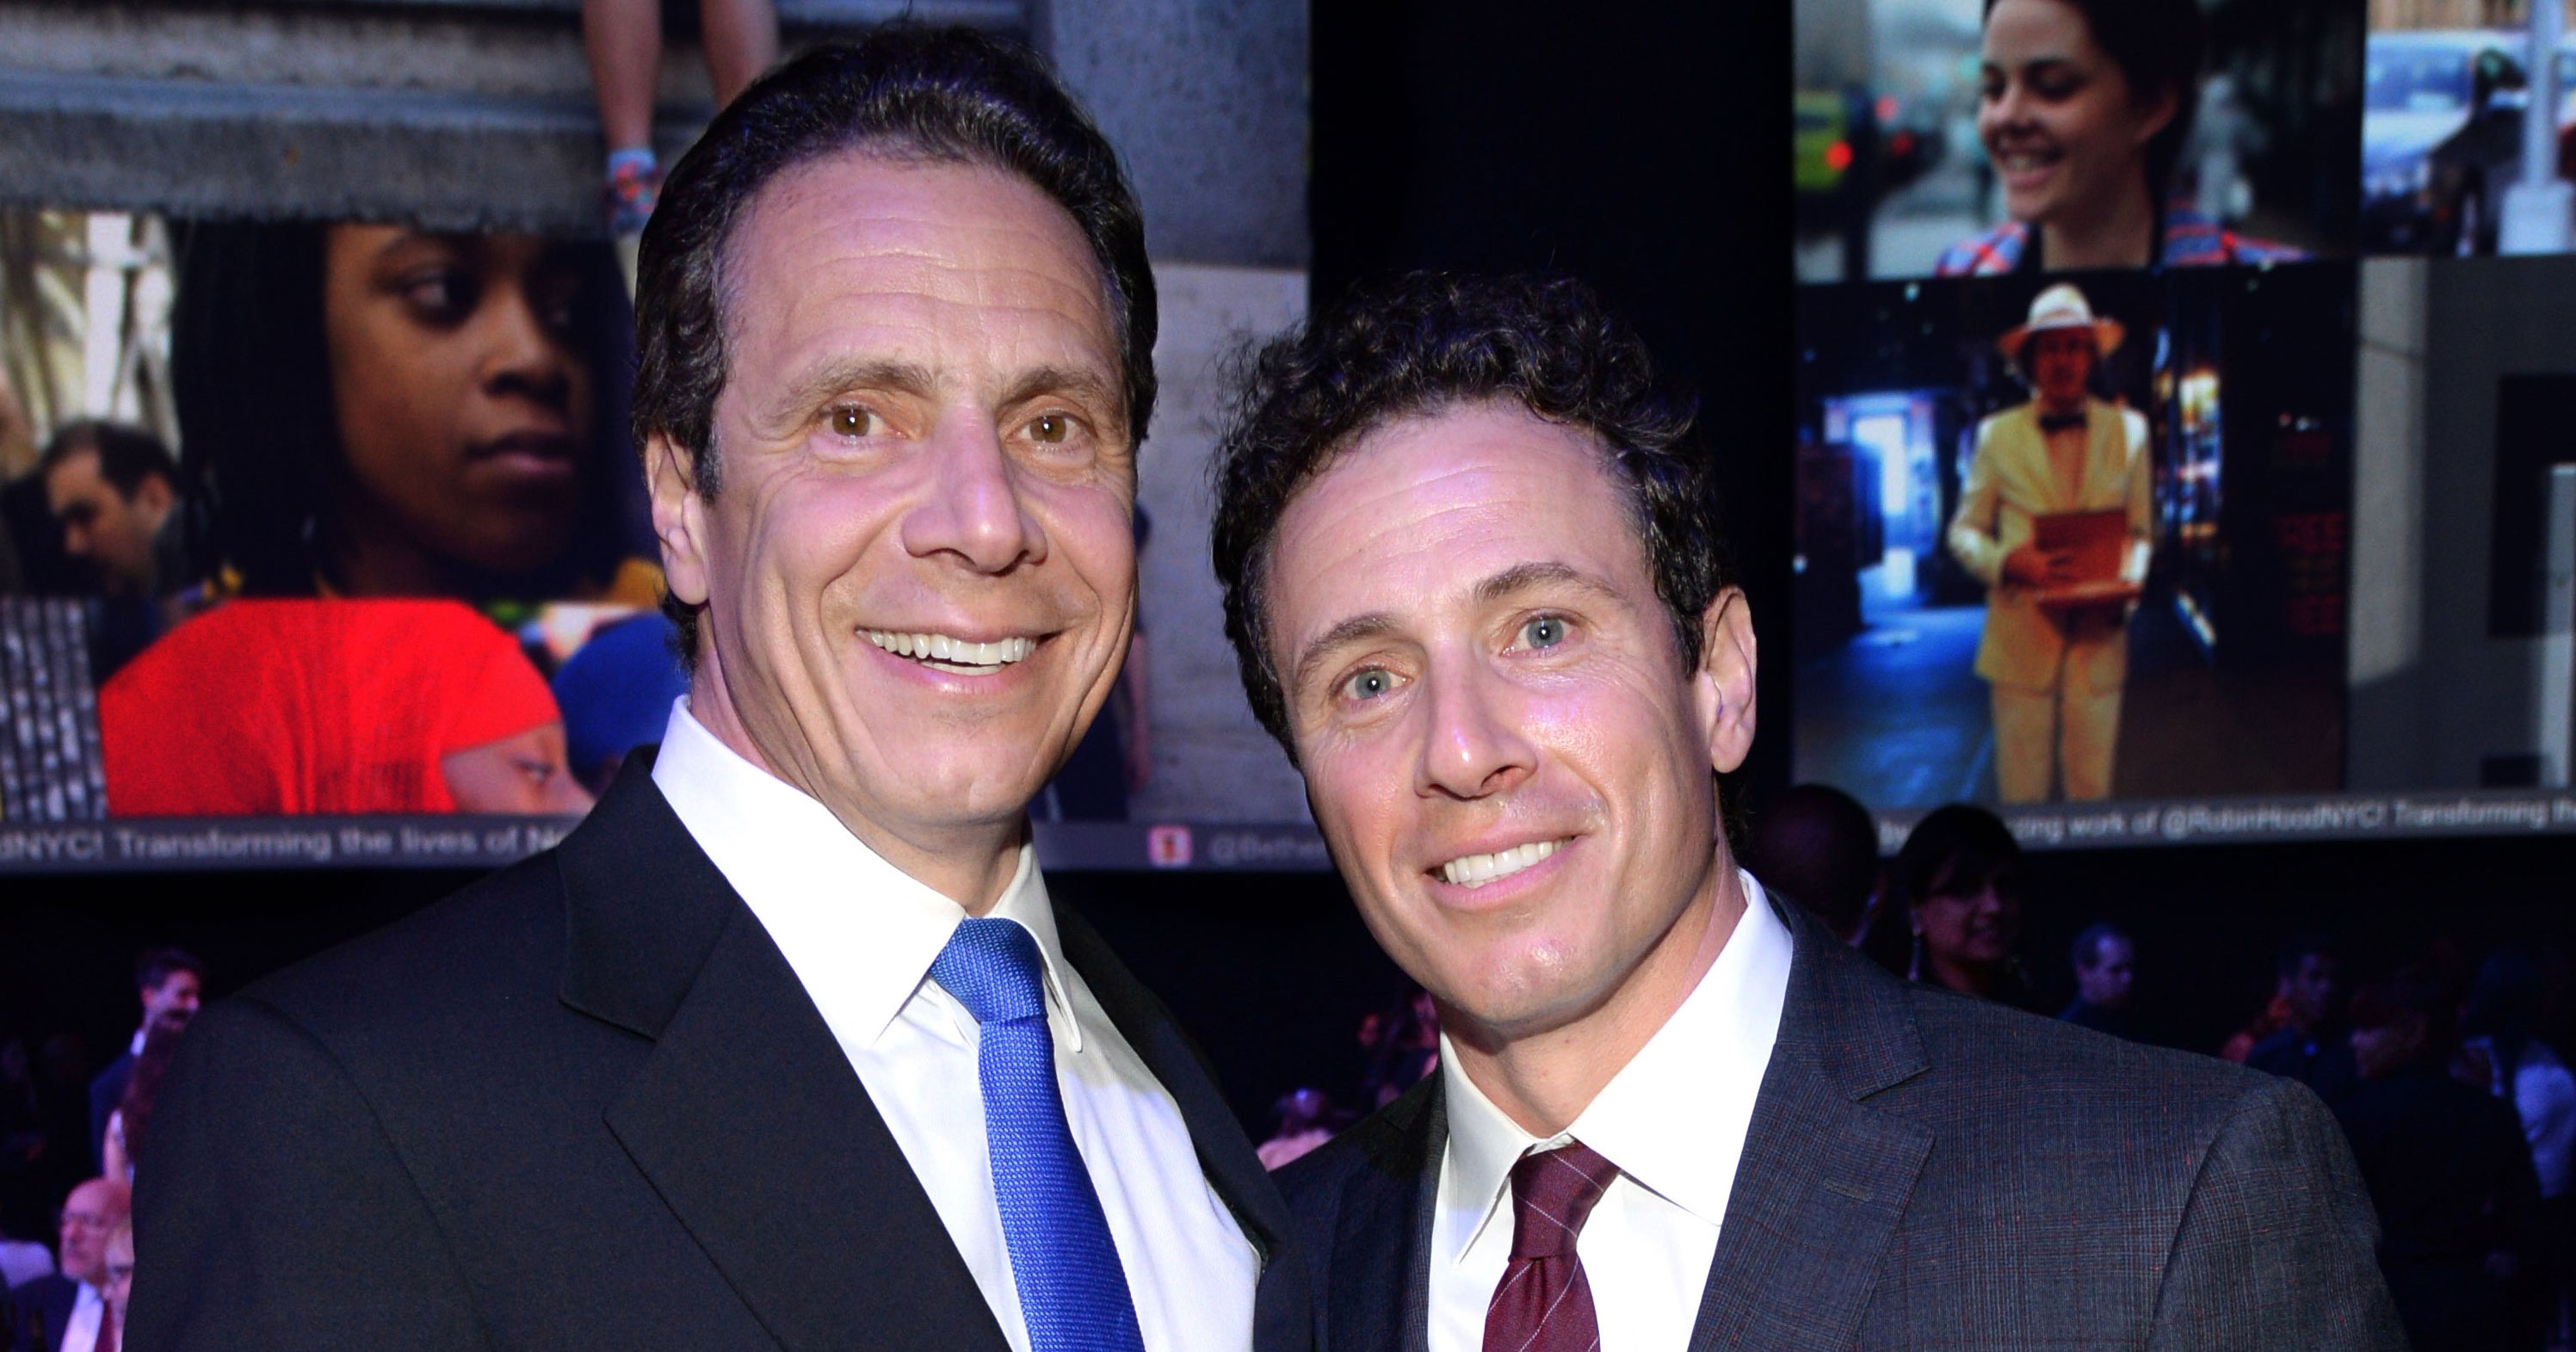 Andrew Cuomo Wife And Kids : The Life and Times of Mario Cuomo - NBC ...